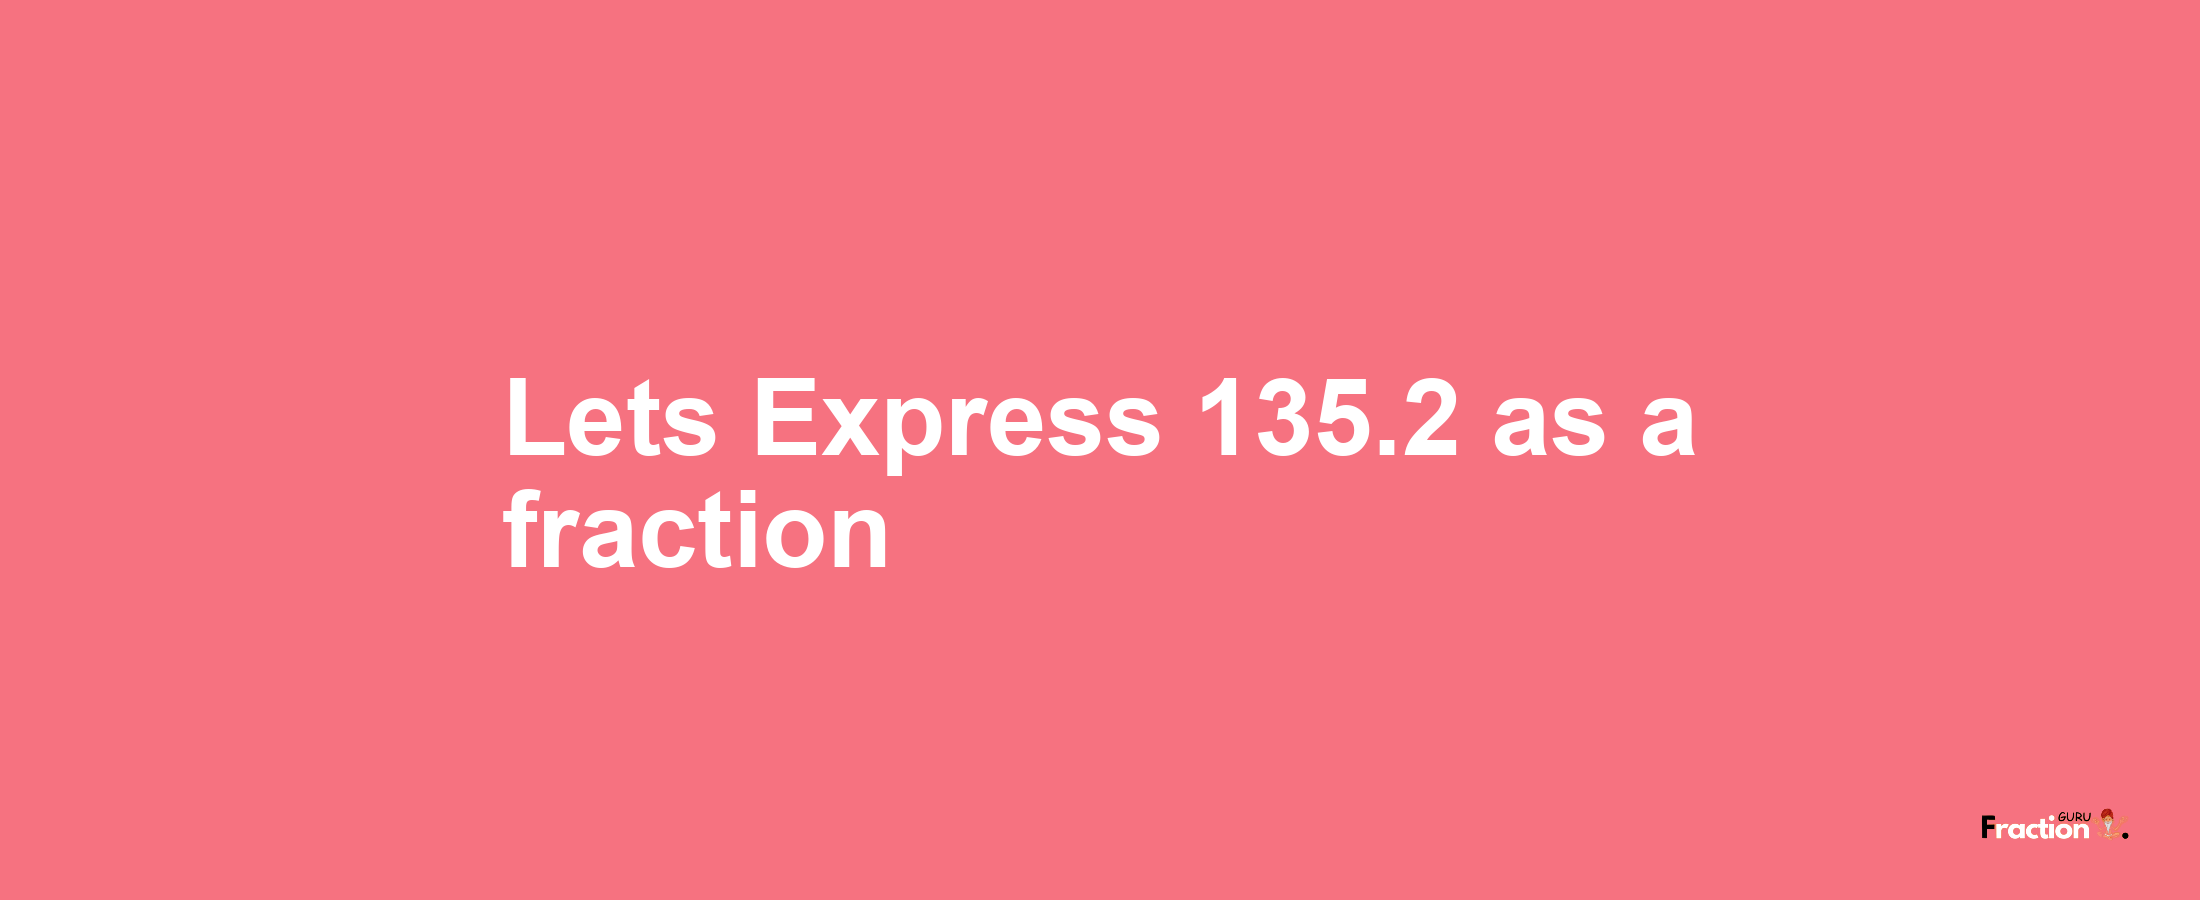 Lets Express 135.2 as afraction